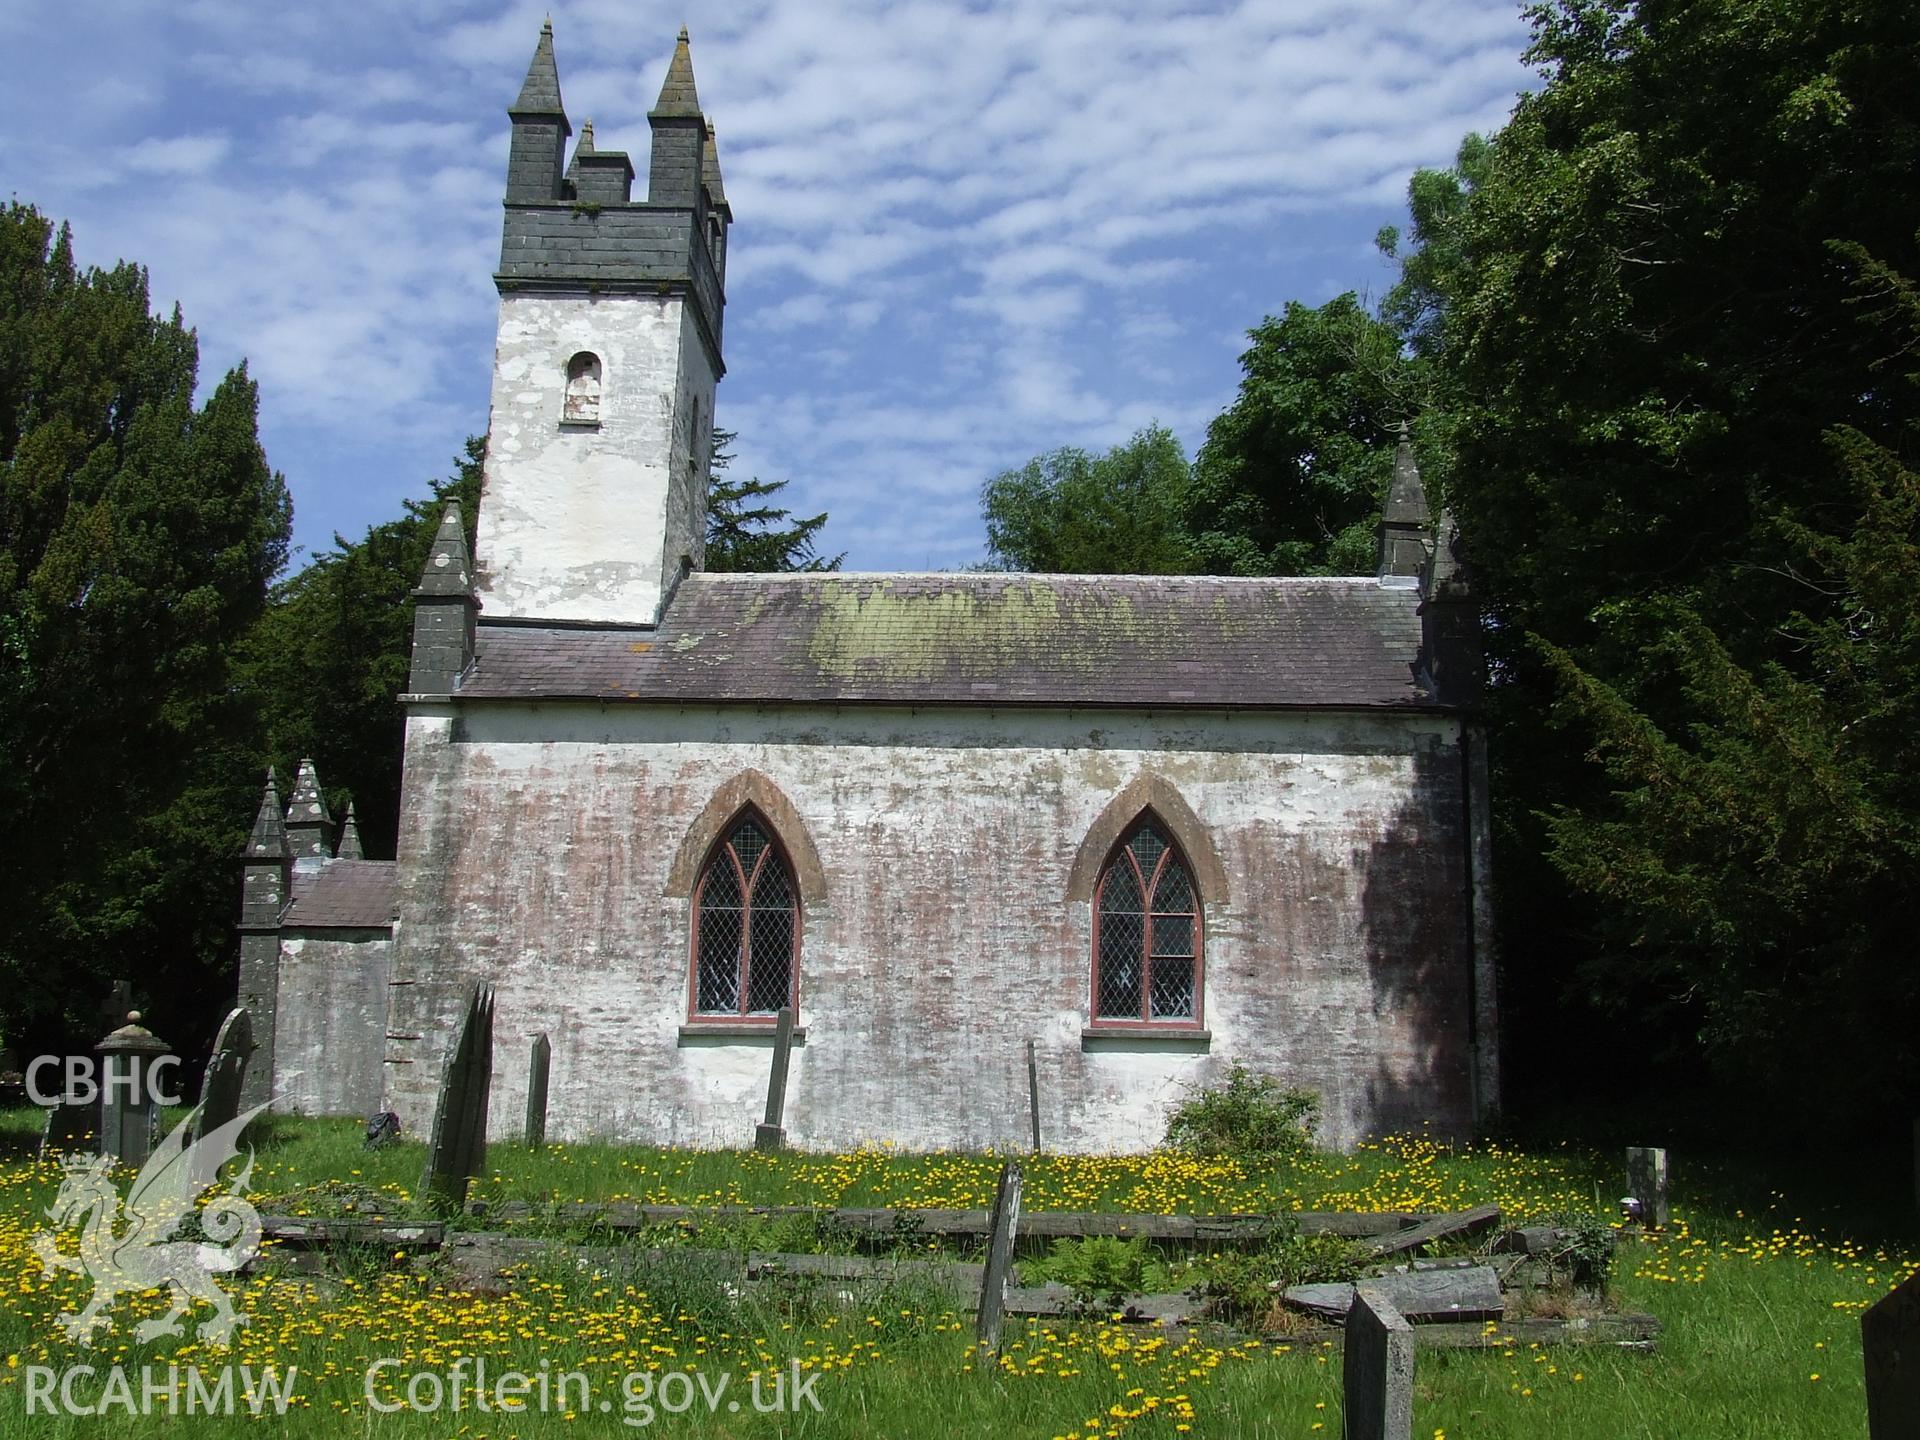 Digital colour photograph showing exterior of Colman's church, Boncath. Produced by Martin Davies in 2022.